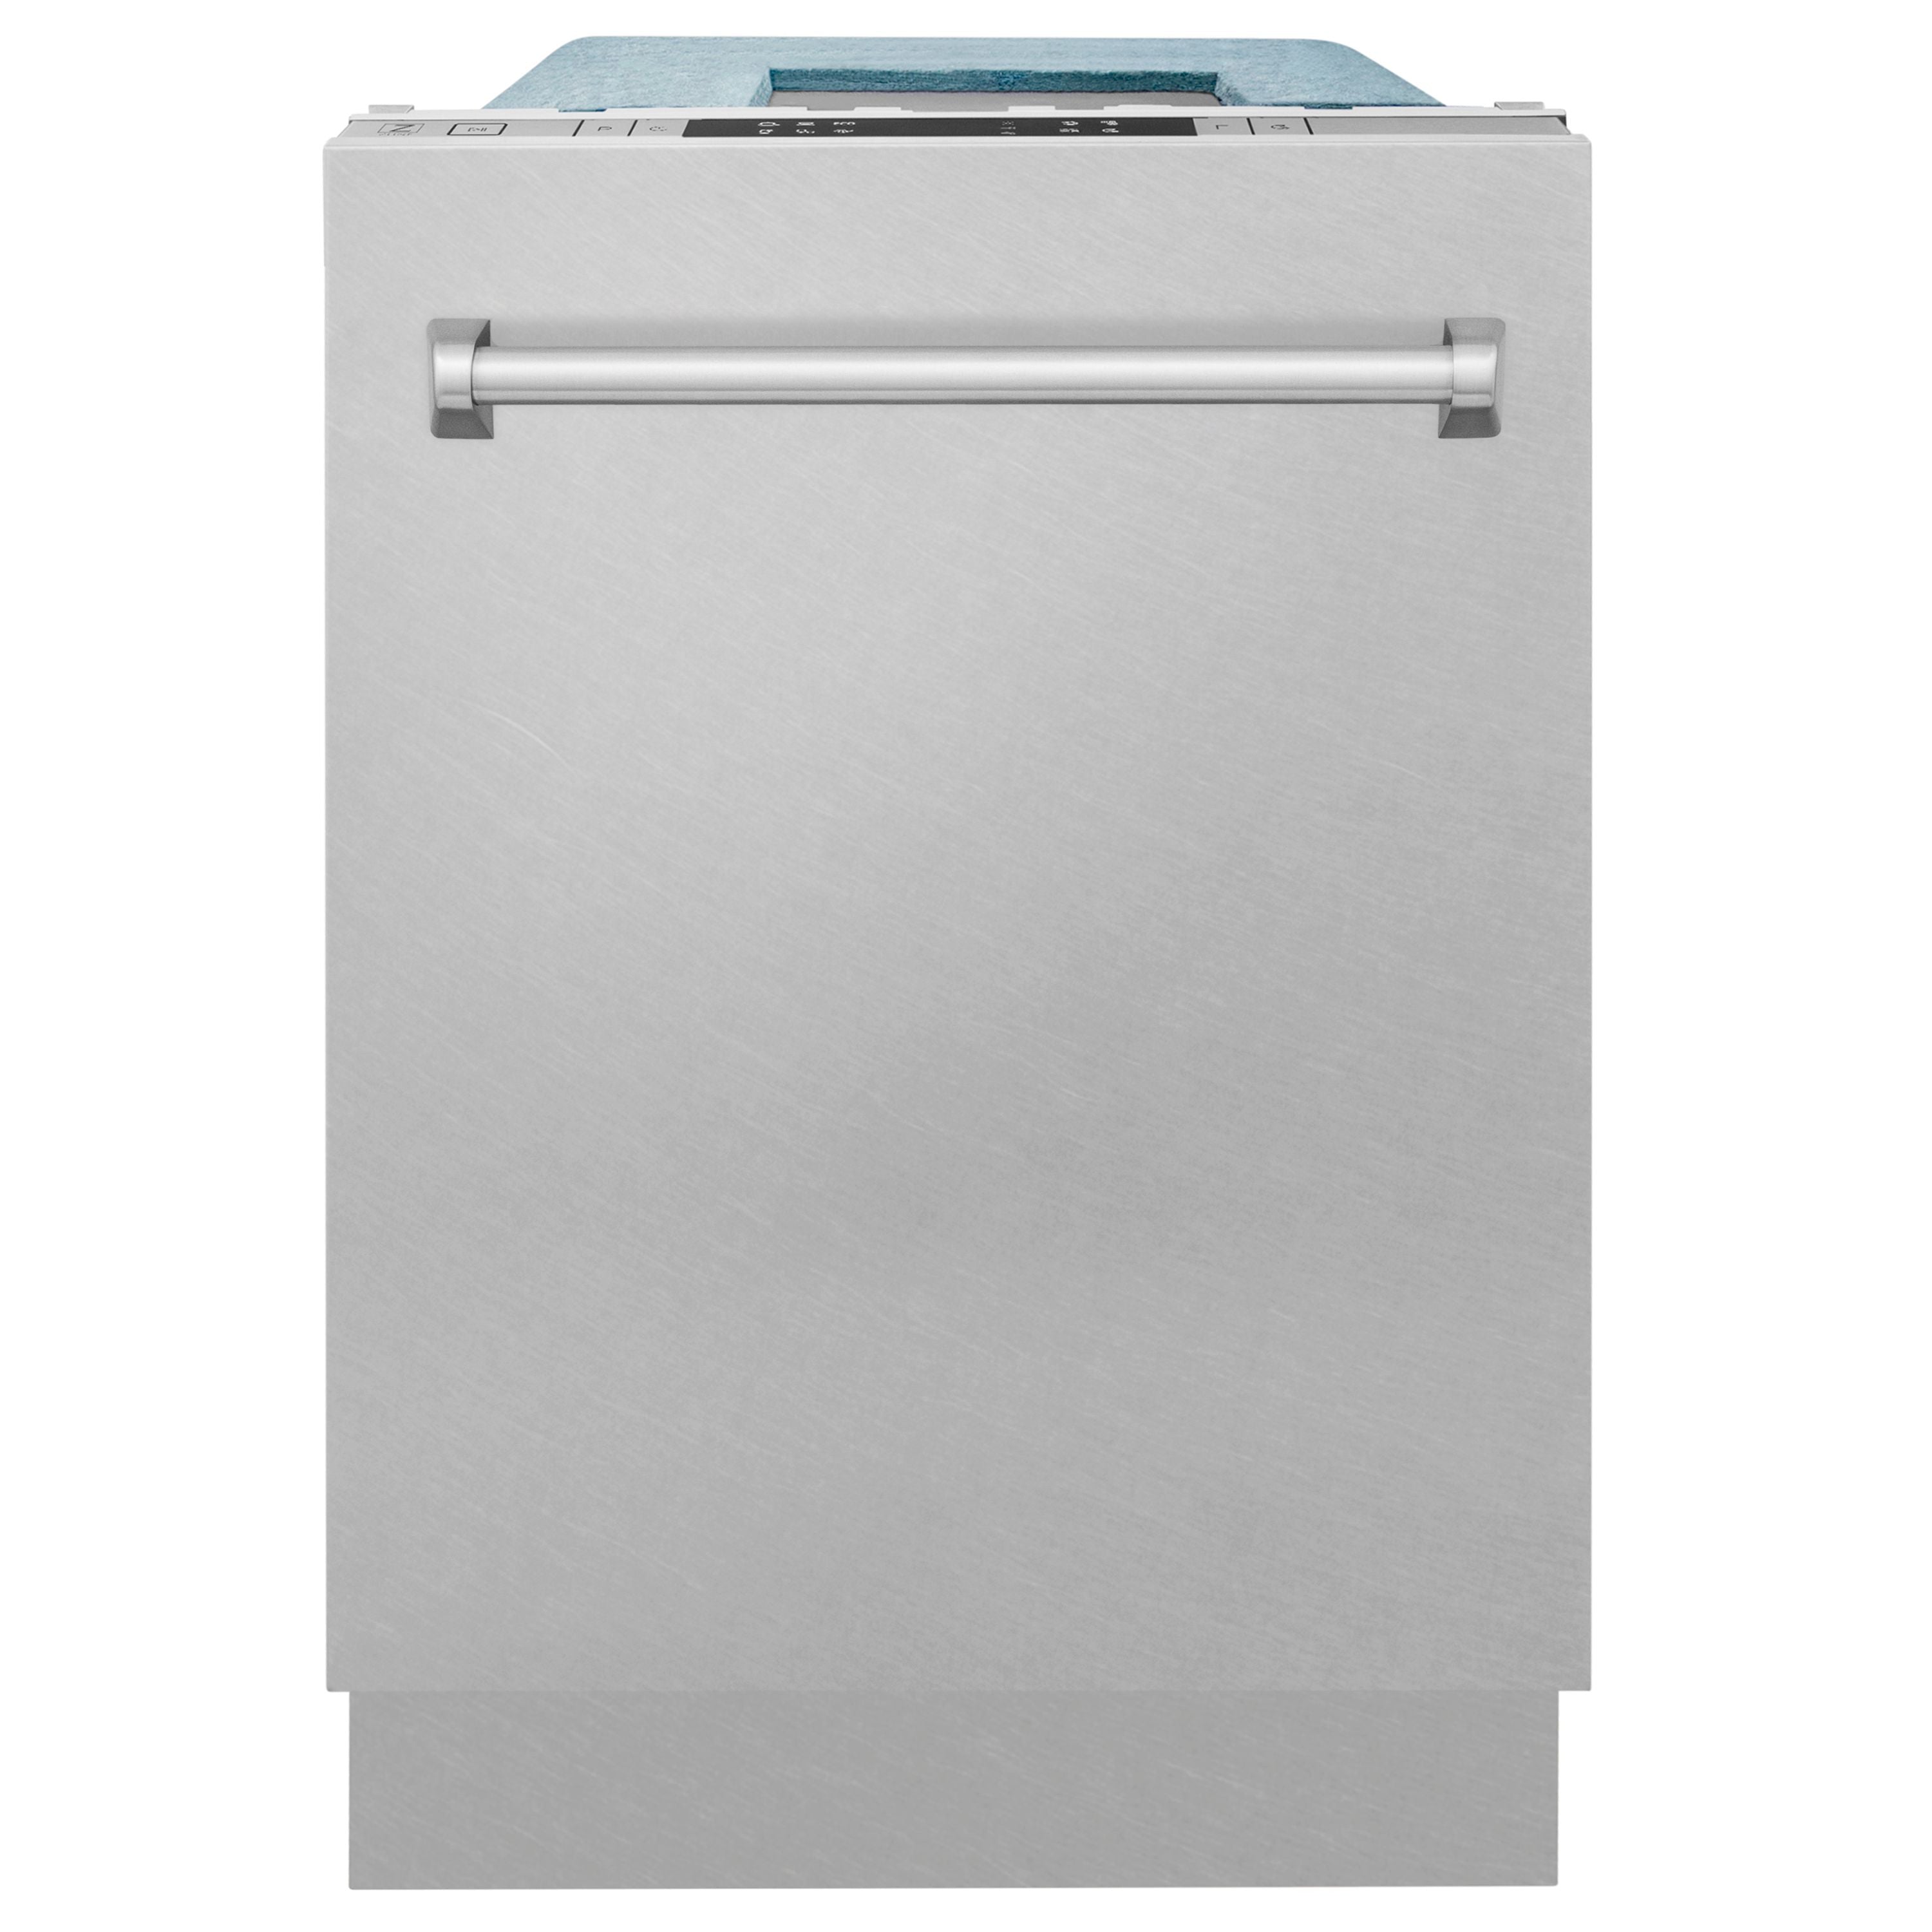 ZLINE 18 in. Top Control Dishwasher in DuraSnow® Stainless Steel with Stainless Steel Tub